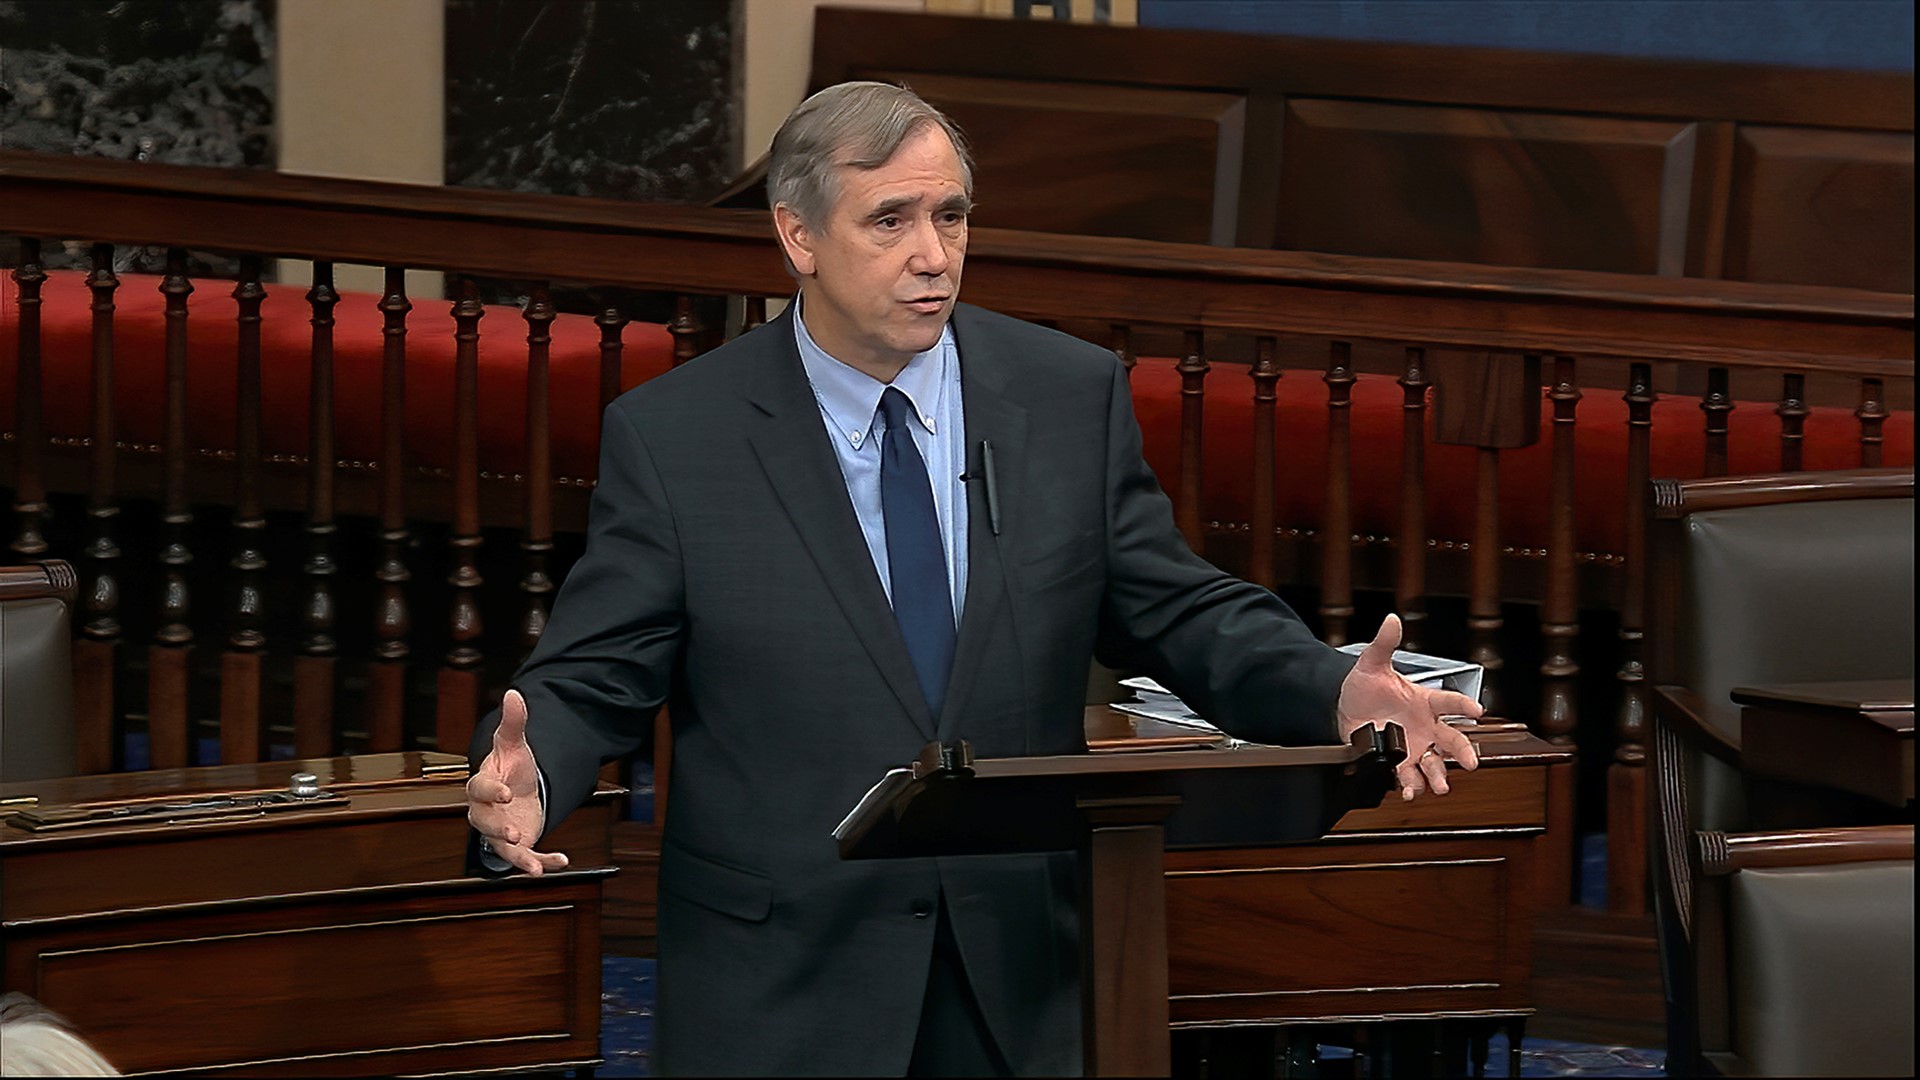 Democratic Senator Jeff Merkley from Oregon is Laural Porter's guest on this week's episode of KGW's Straight Talk.